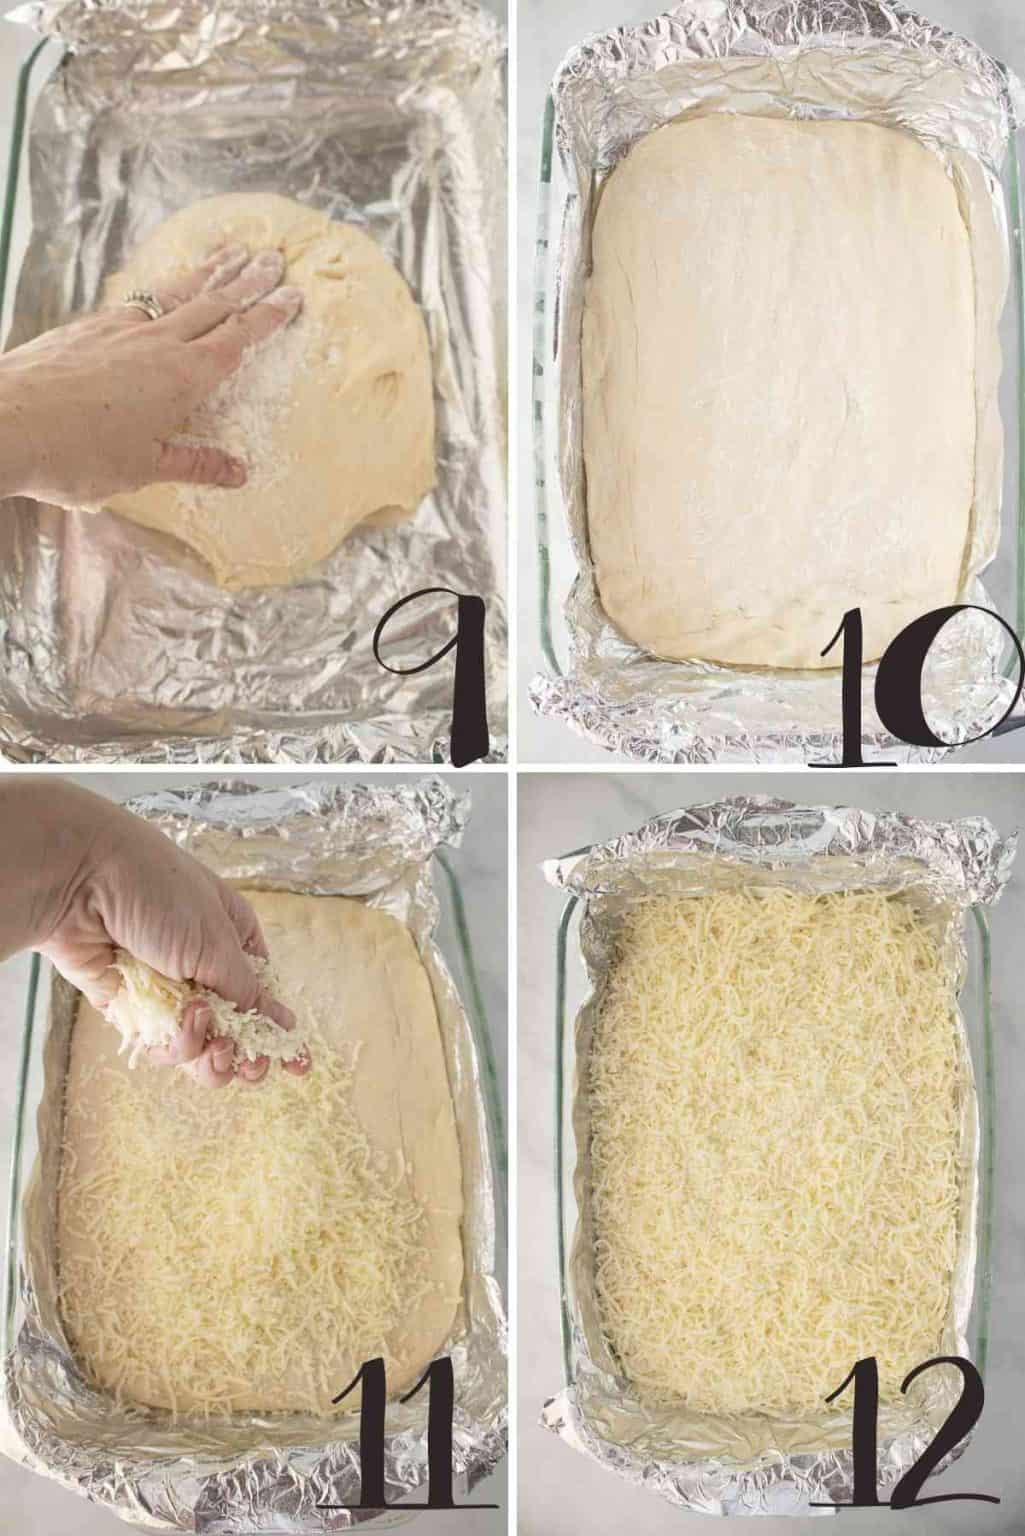 Copycat Italian Cheese Bread - Mindee's Cooking Obsession